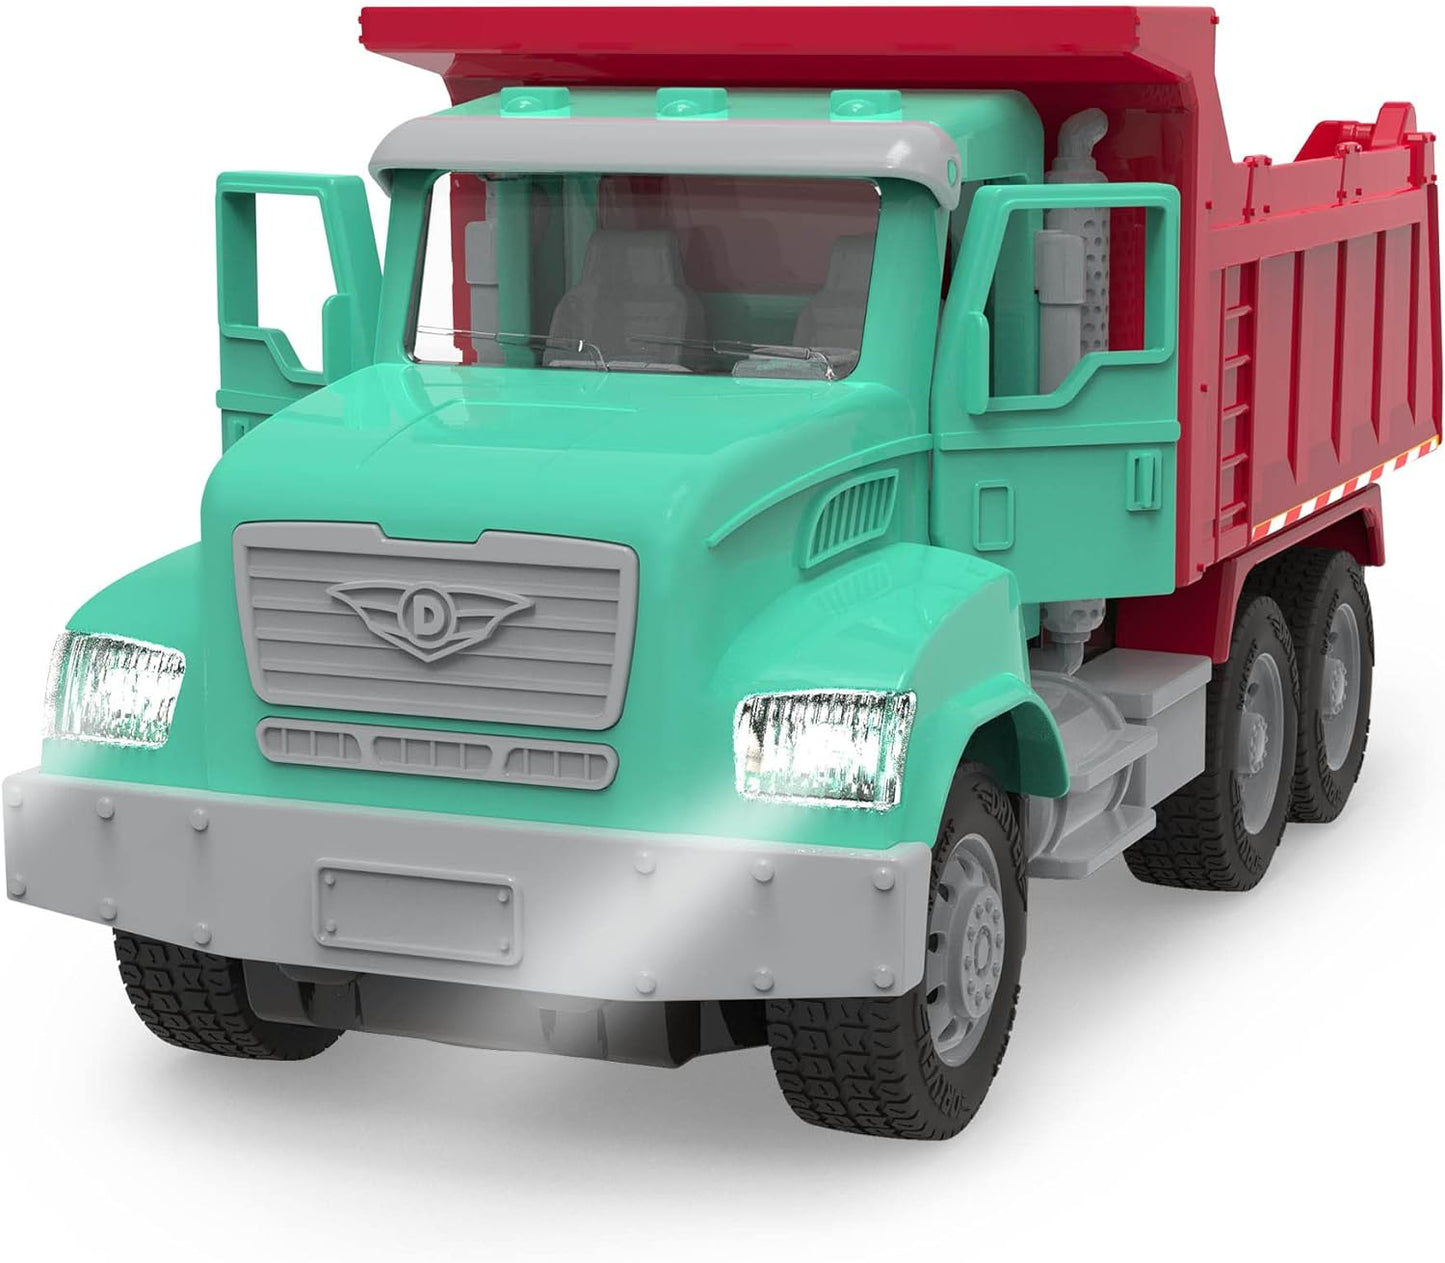 [Driven by Battat] Remote Control Micro Green Dump Truck with Realistic Lights and Sounds